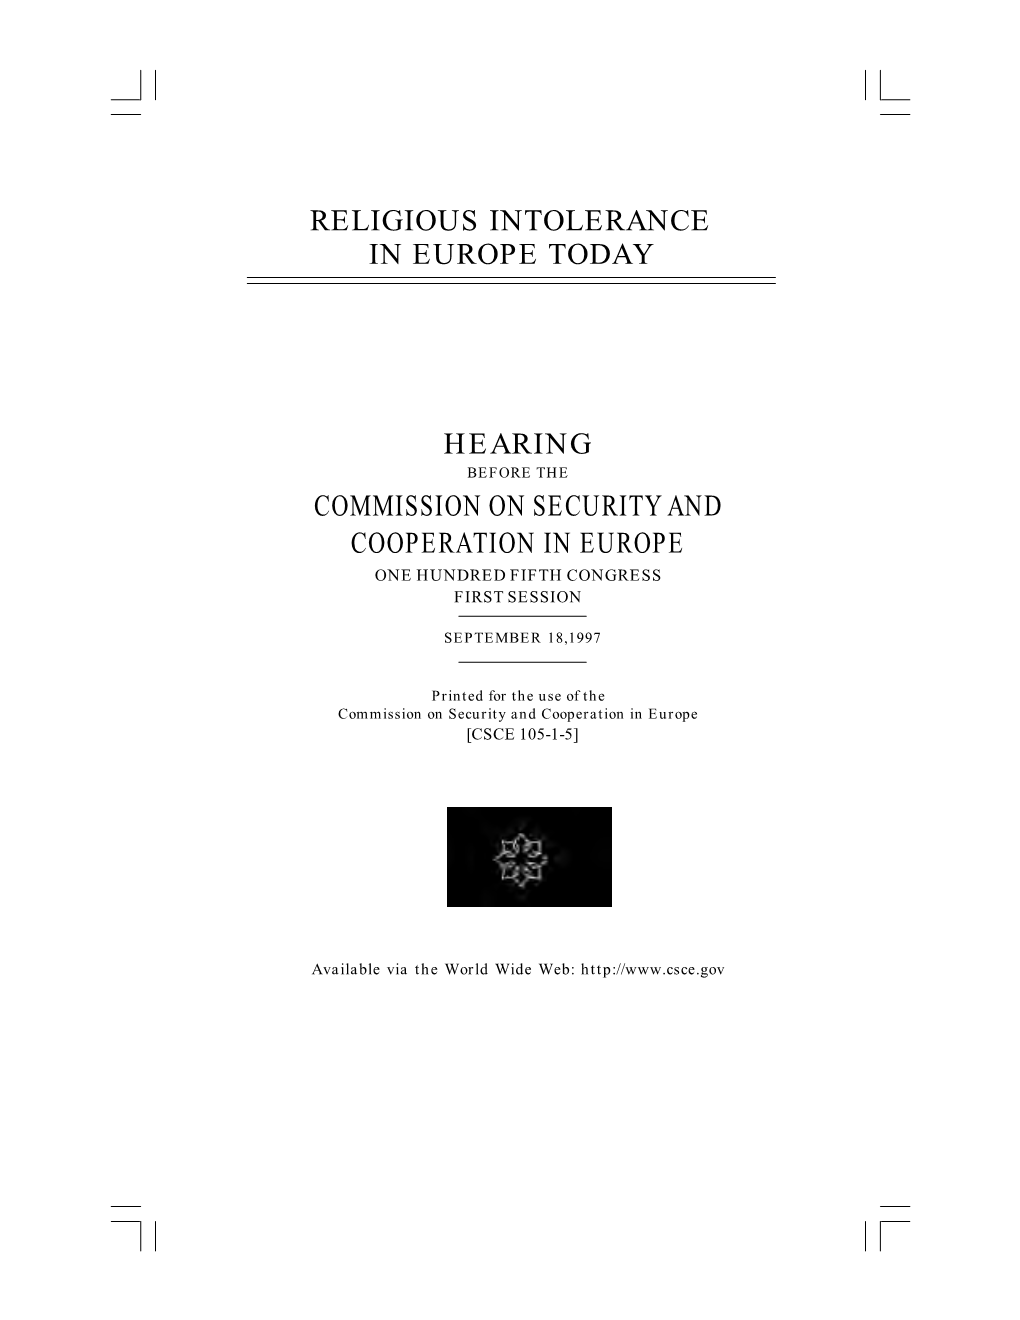 Religious Intolerance in Europe Today Hearing